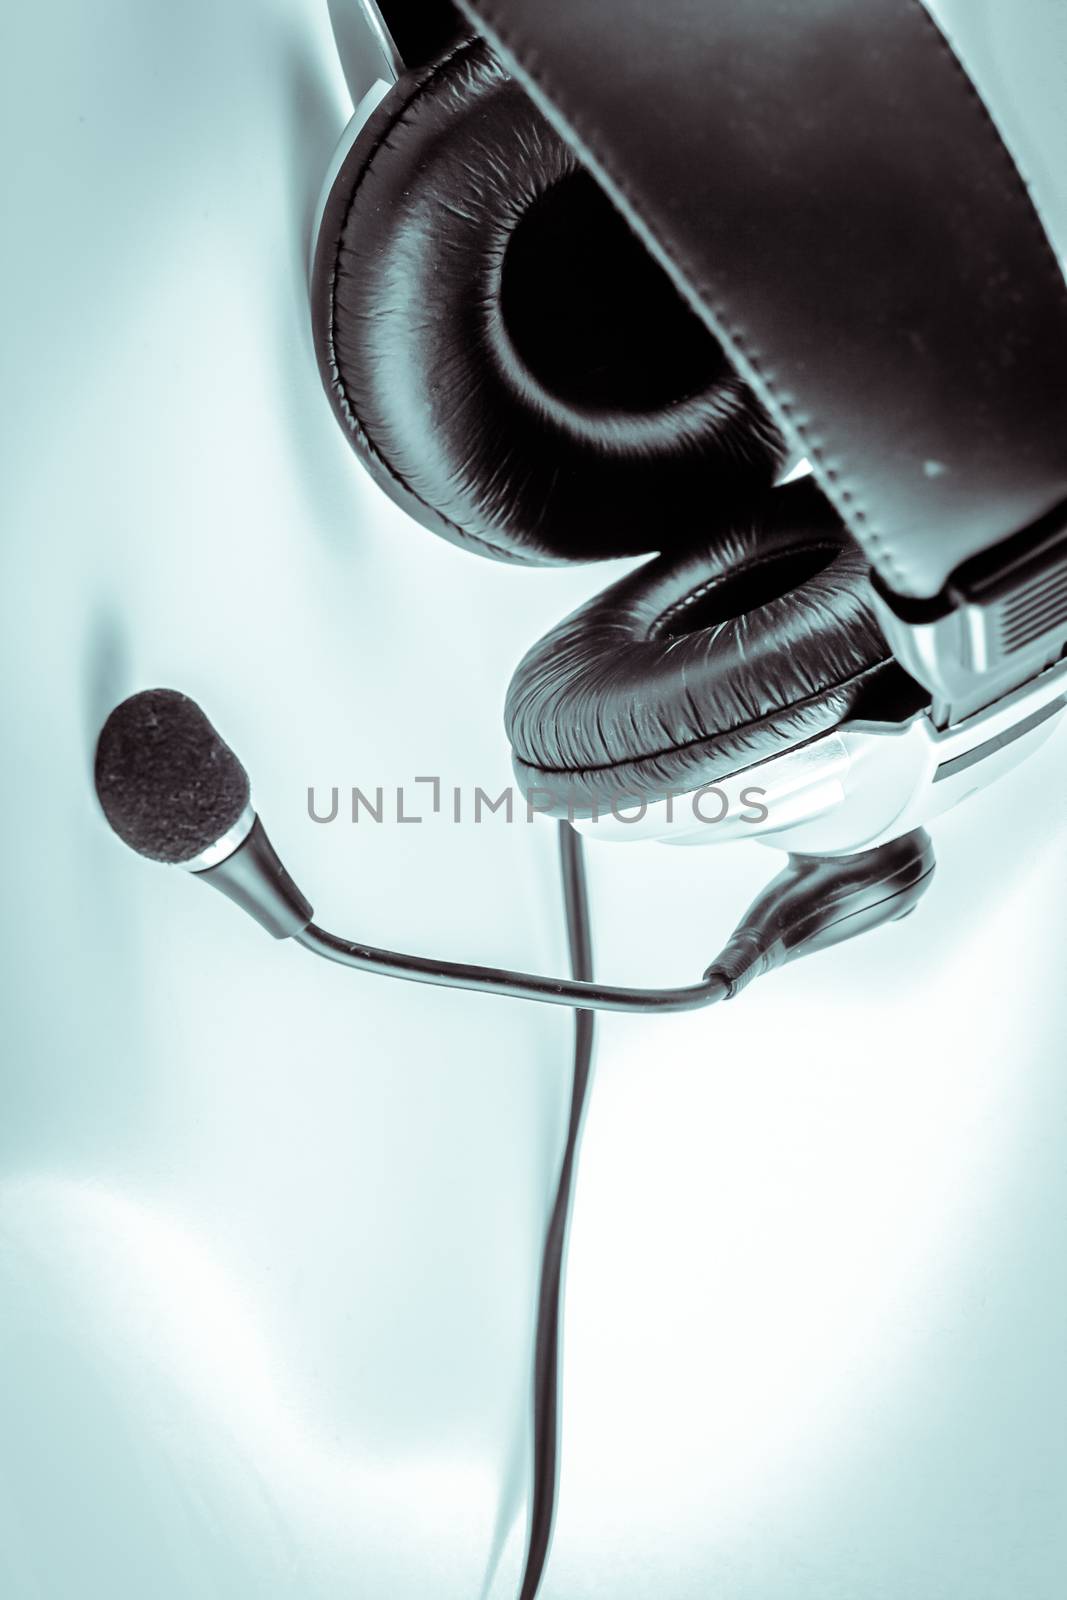 Headset , artistic style toned studio photo with shallow DOF